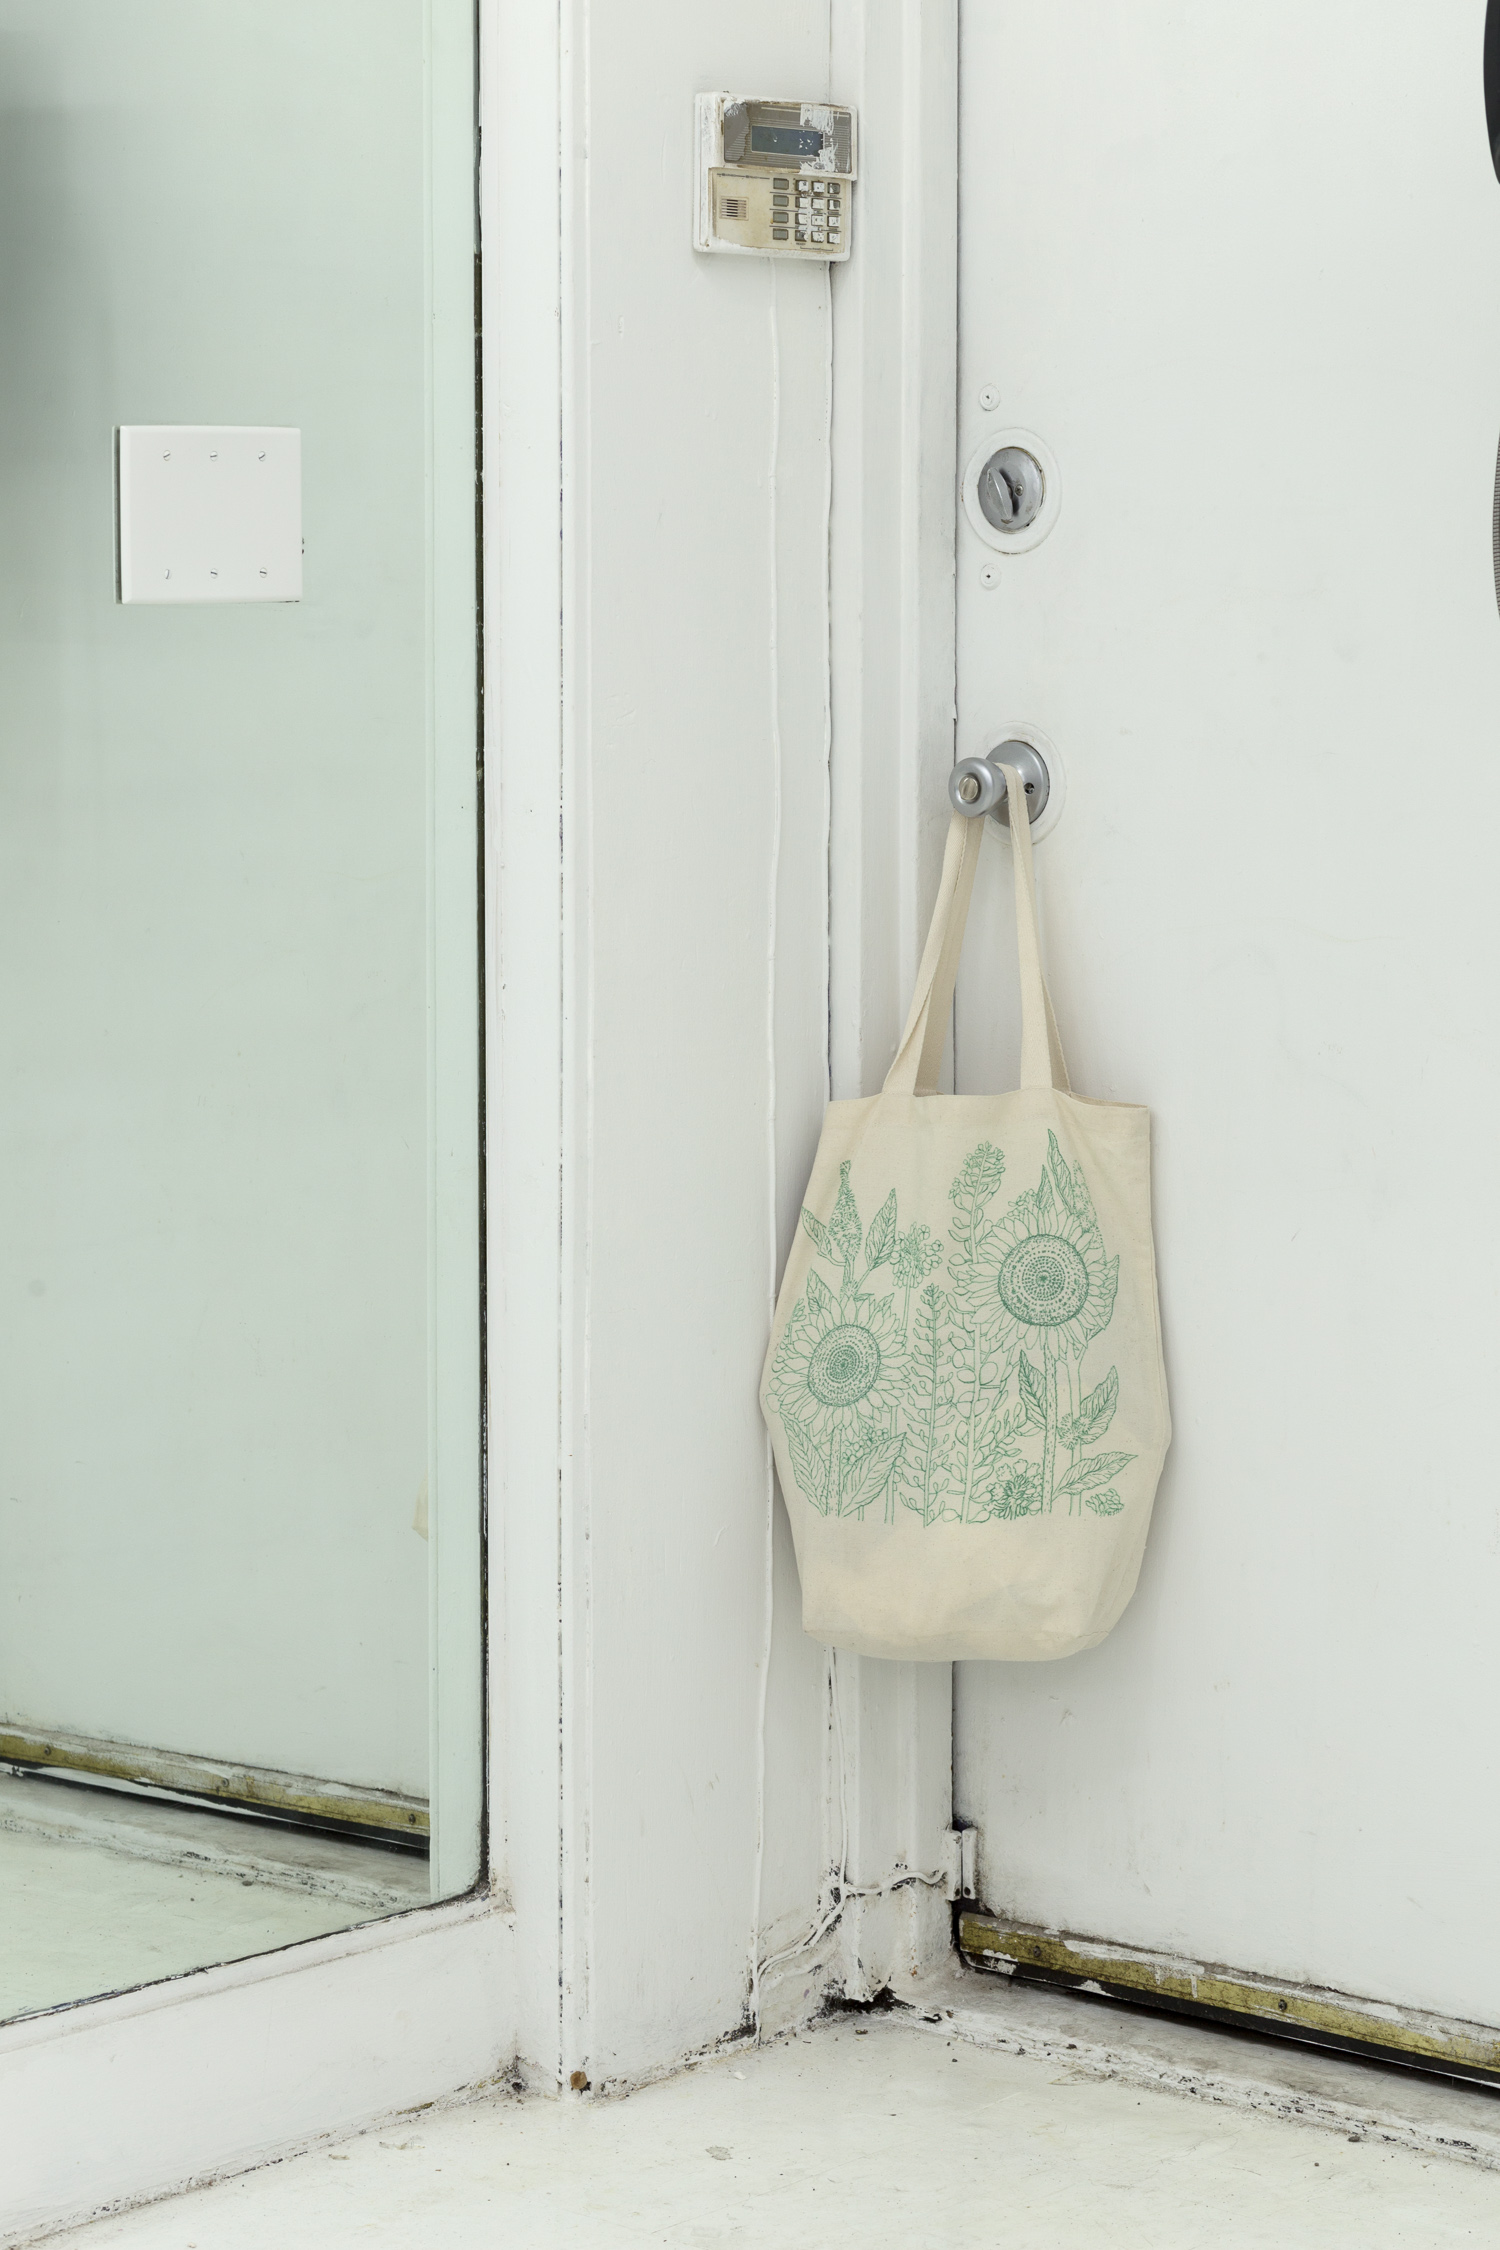 A canvas tote with a drawing of sunflowers in green pen hangs from a doorknob